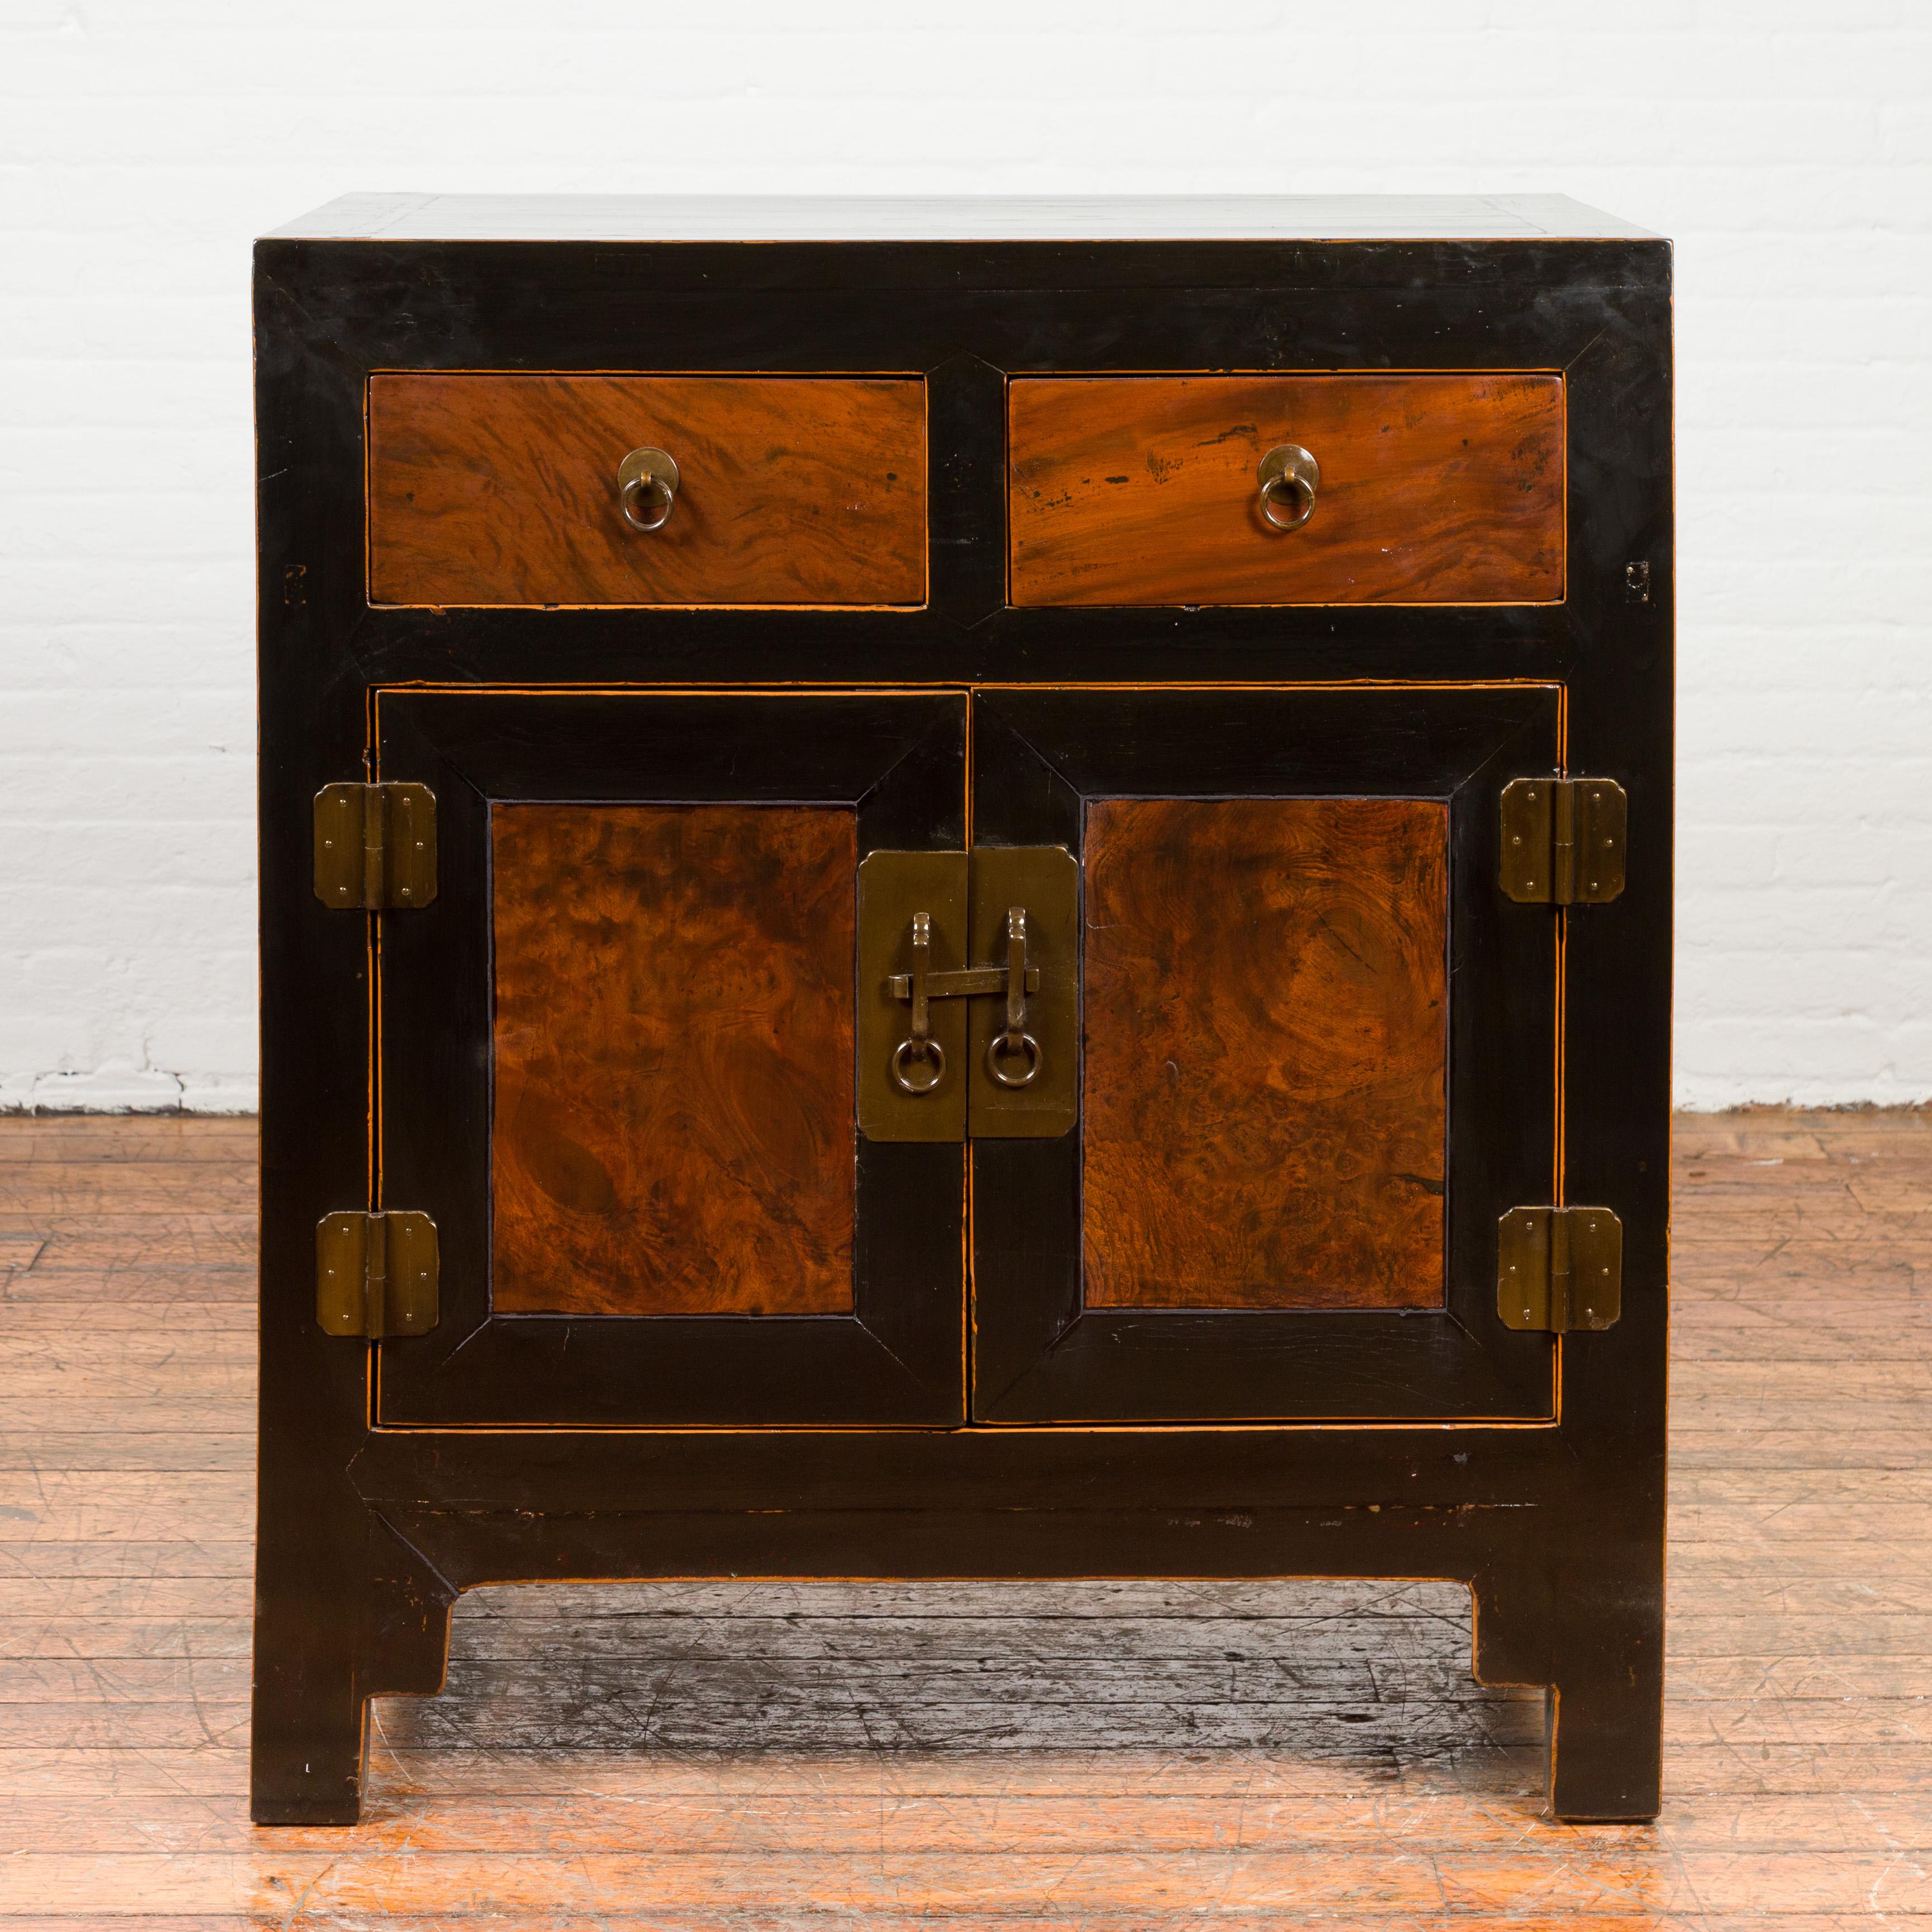 A Chinese Hebei black lacquer low cabinet from the early 20th century, with burl wood doors and drawers. Created in the Northeastern province of Hebei during the early years of the 20th century, this low cabinet features a linear silhouette